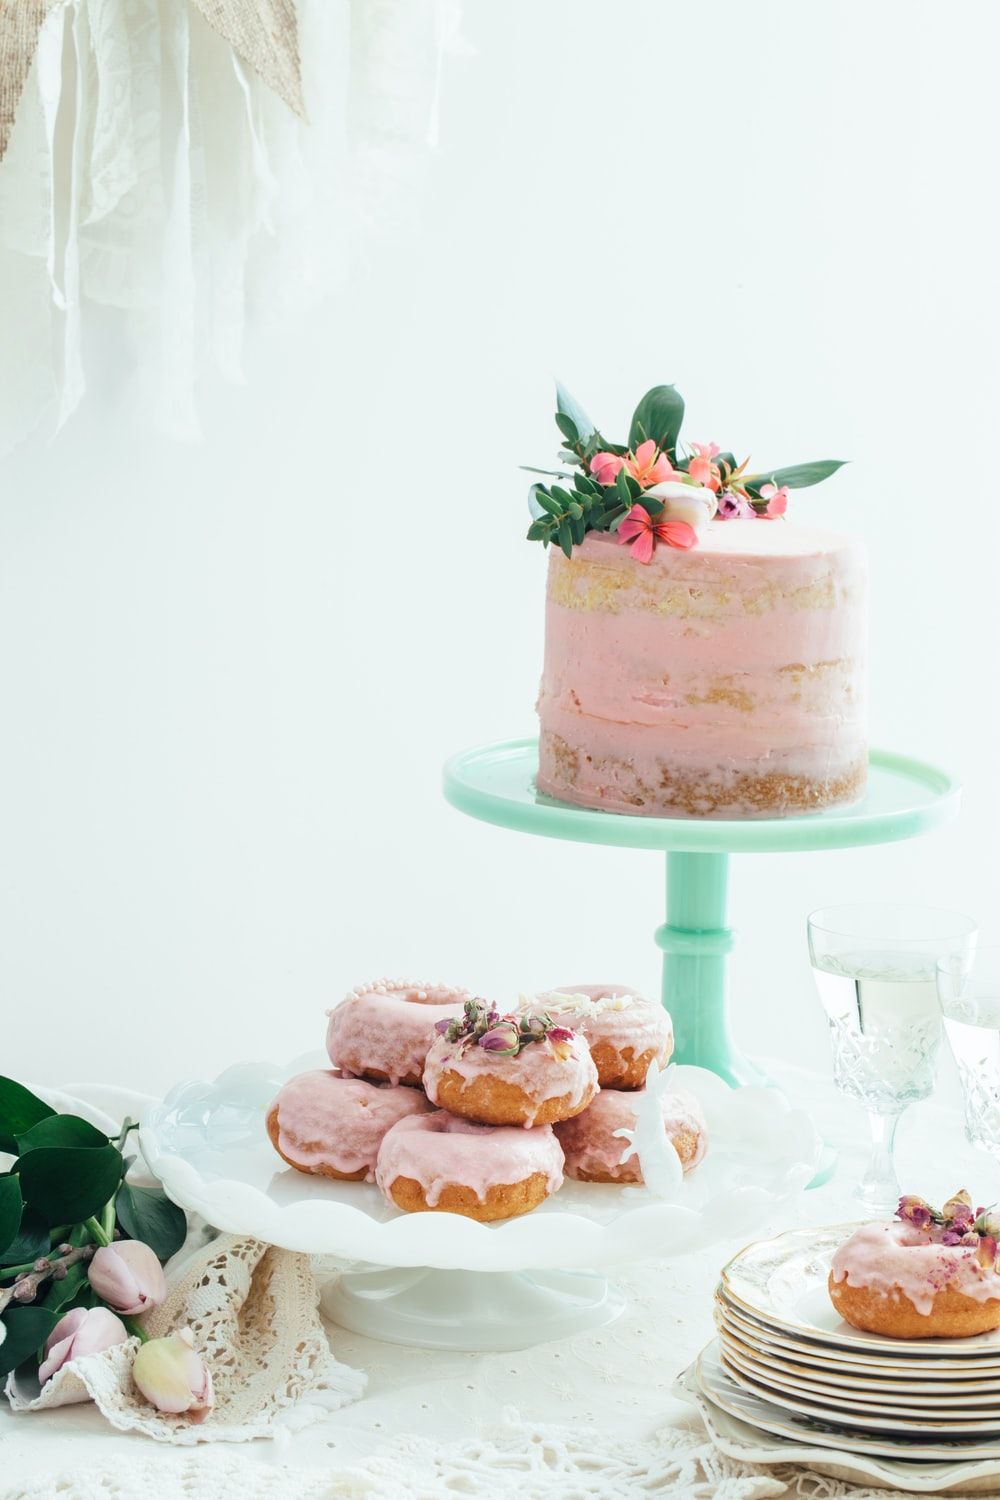 Easter Cake Picture. Download Free Image